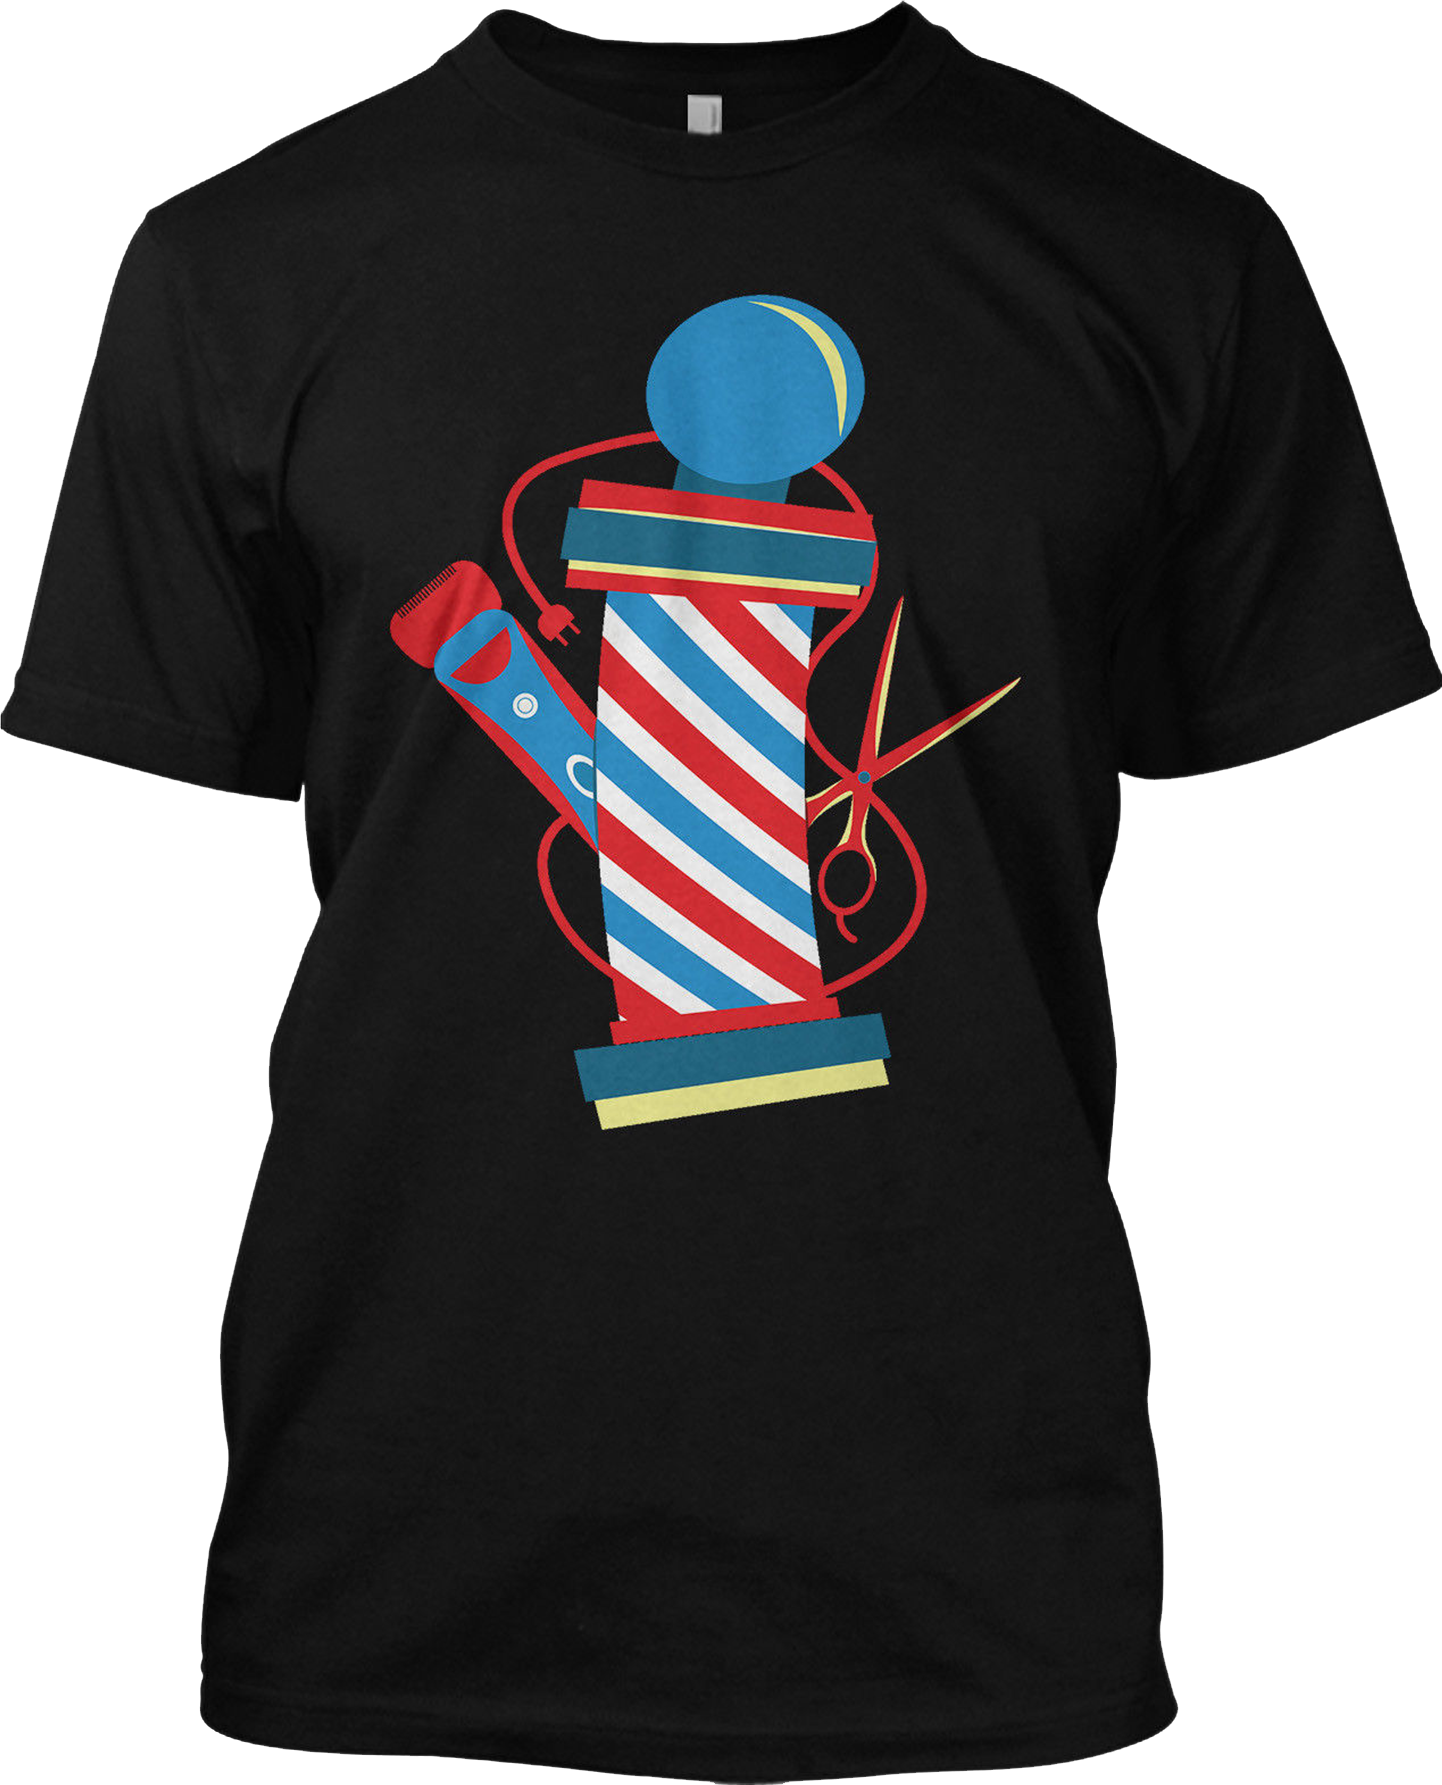 Barber Pole Scissors and Clippers Funny Gift T Shirt Graphic Tee